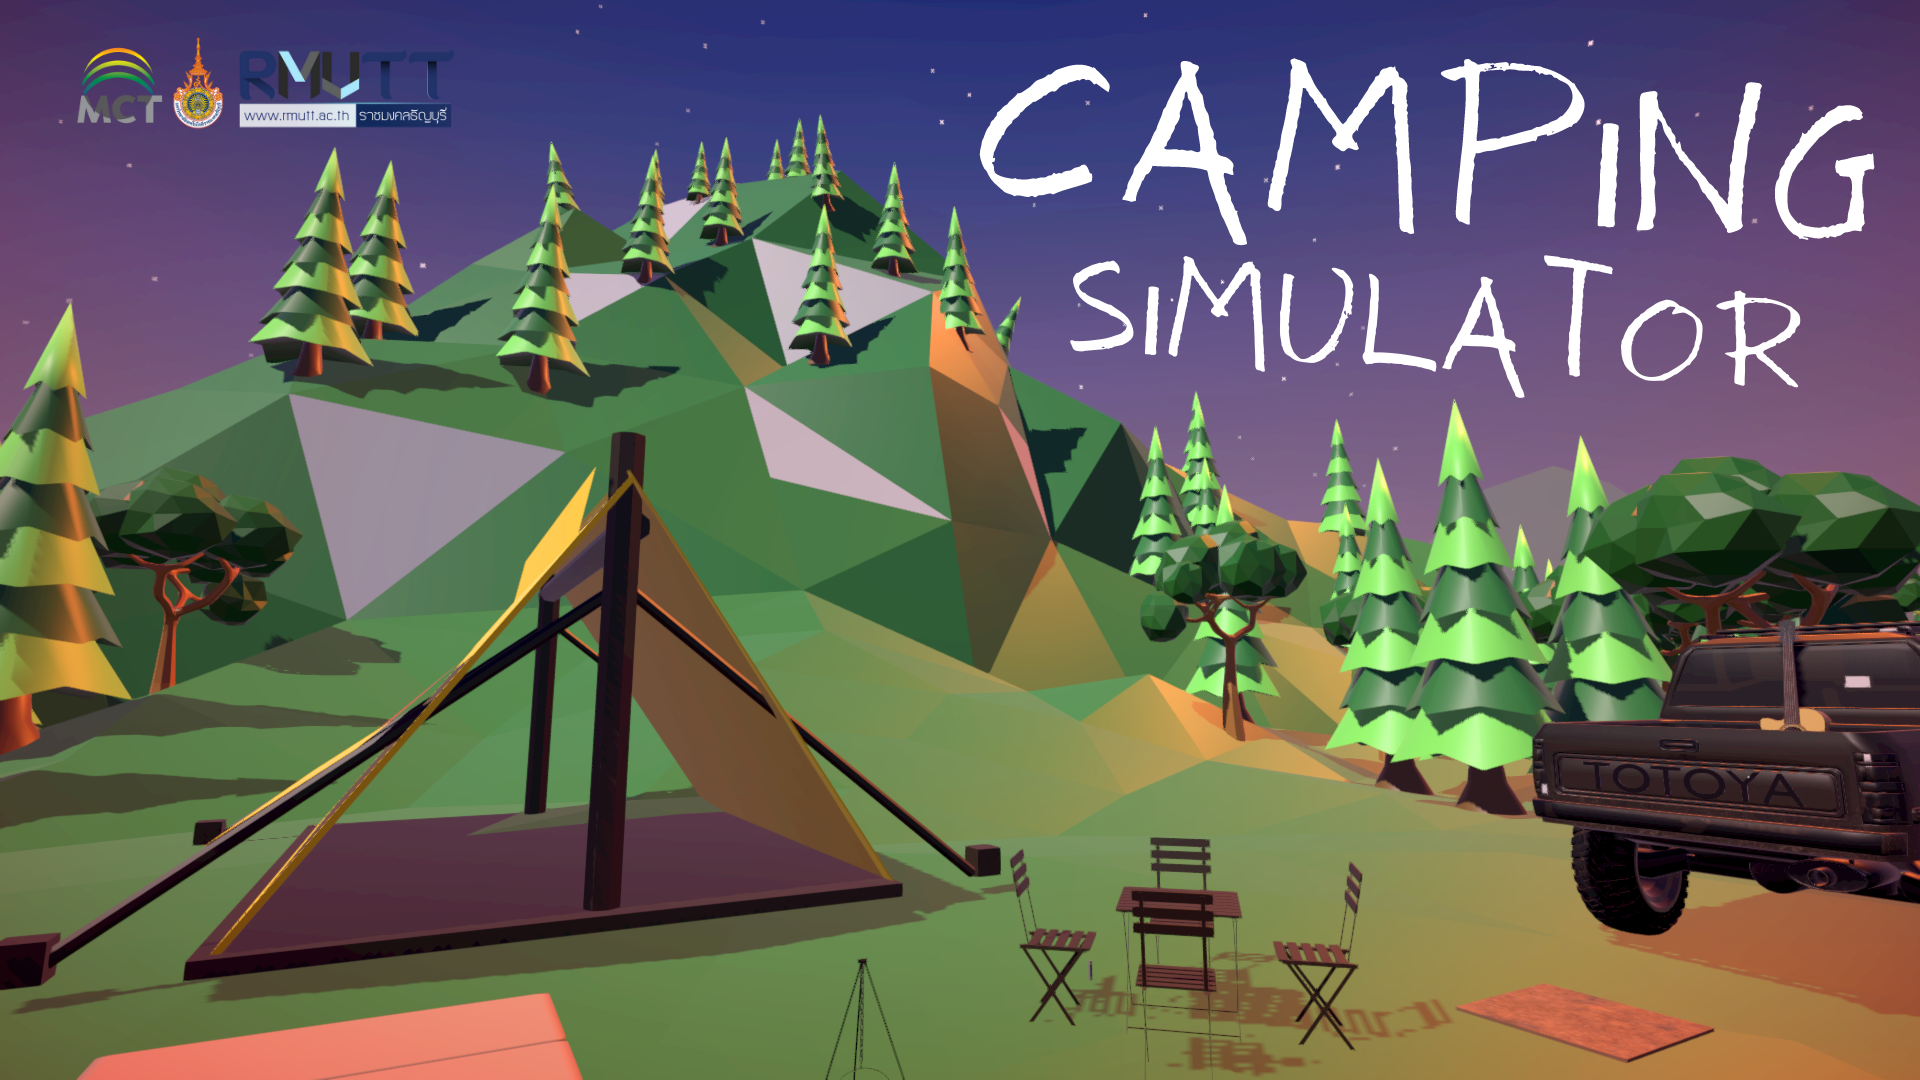 Camping simulator_Final by realtypz for RMUTT Unity First VR Game Jam ...